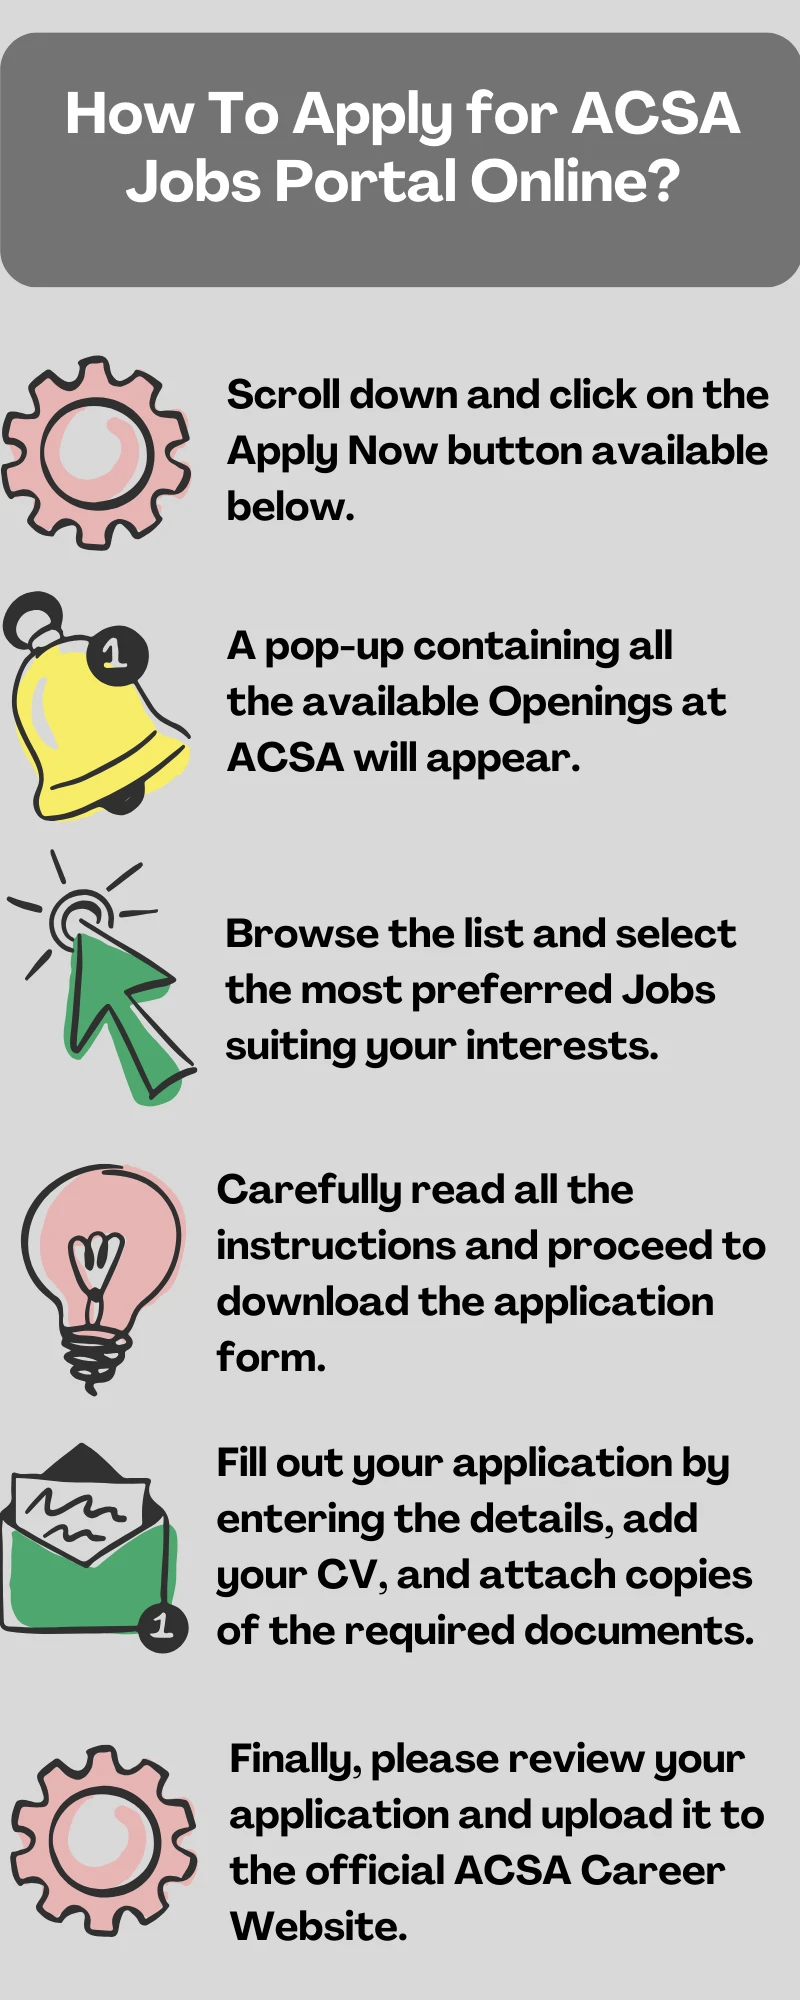 How To Apply for ACSA Jobs Portal Online?